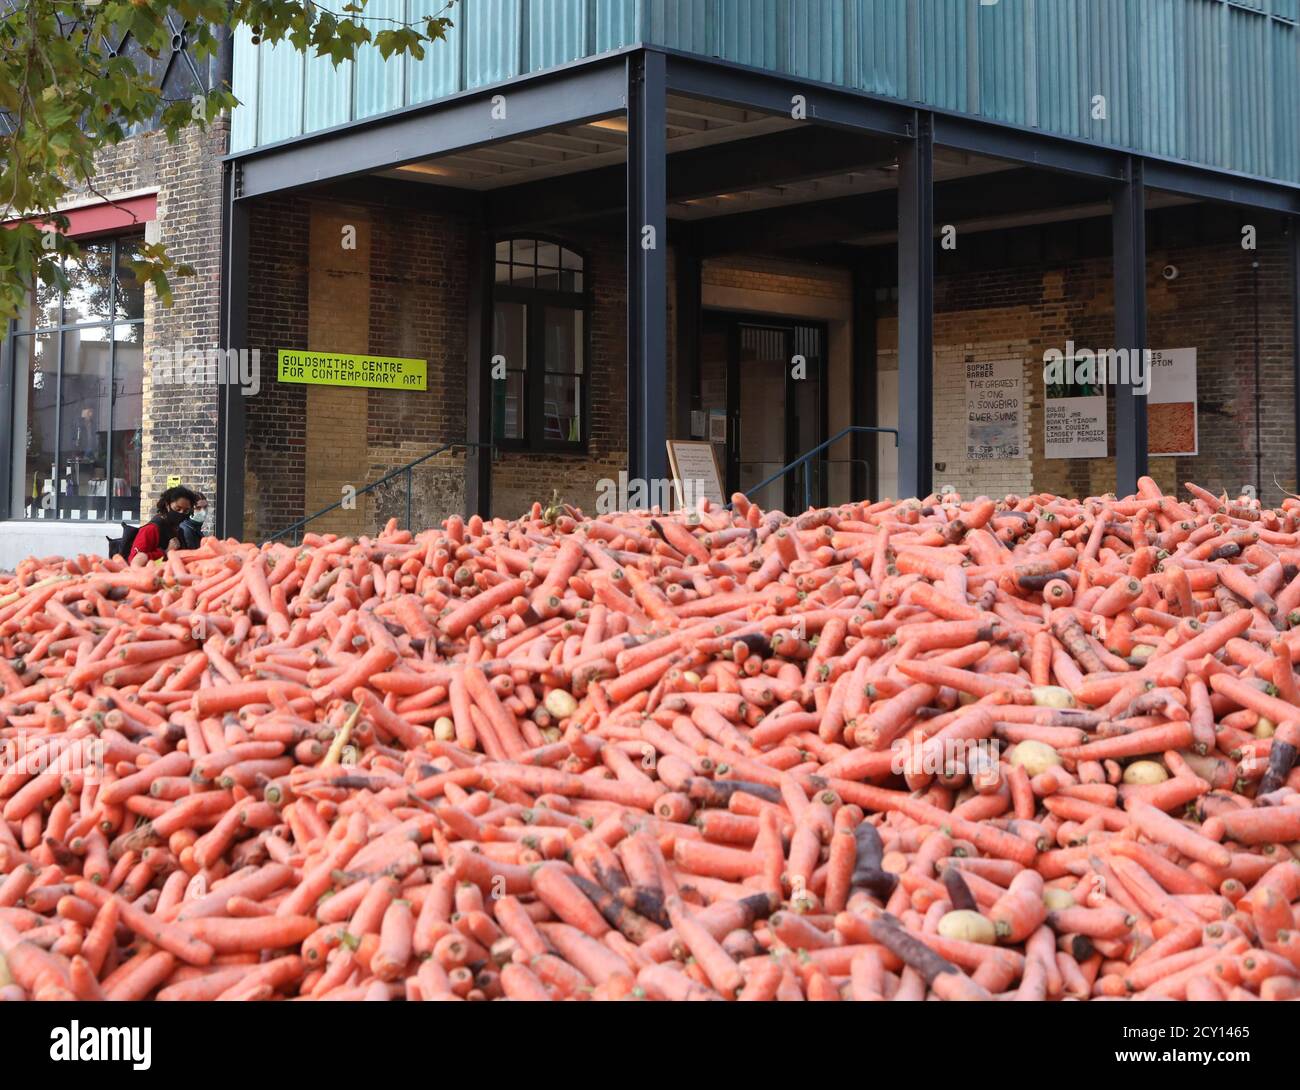 The art installation 'Grounding' by Rafael Perez Evans, which is made up of 29 tonnes of unwanted carrots left outside Goldsmiths College, London. Stock Photo